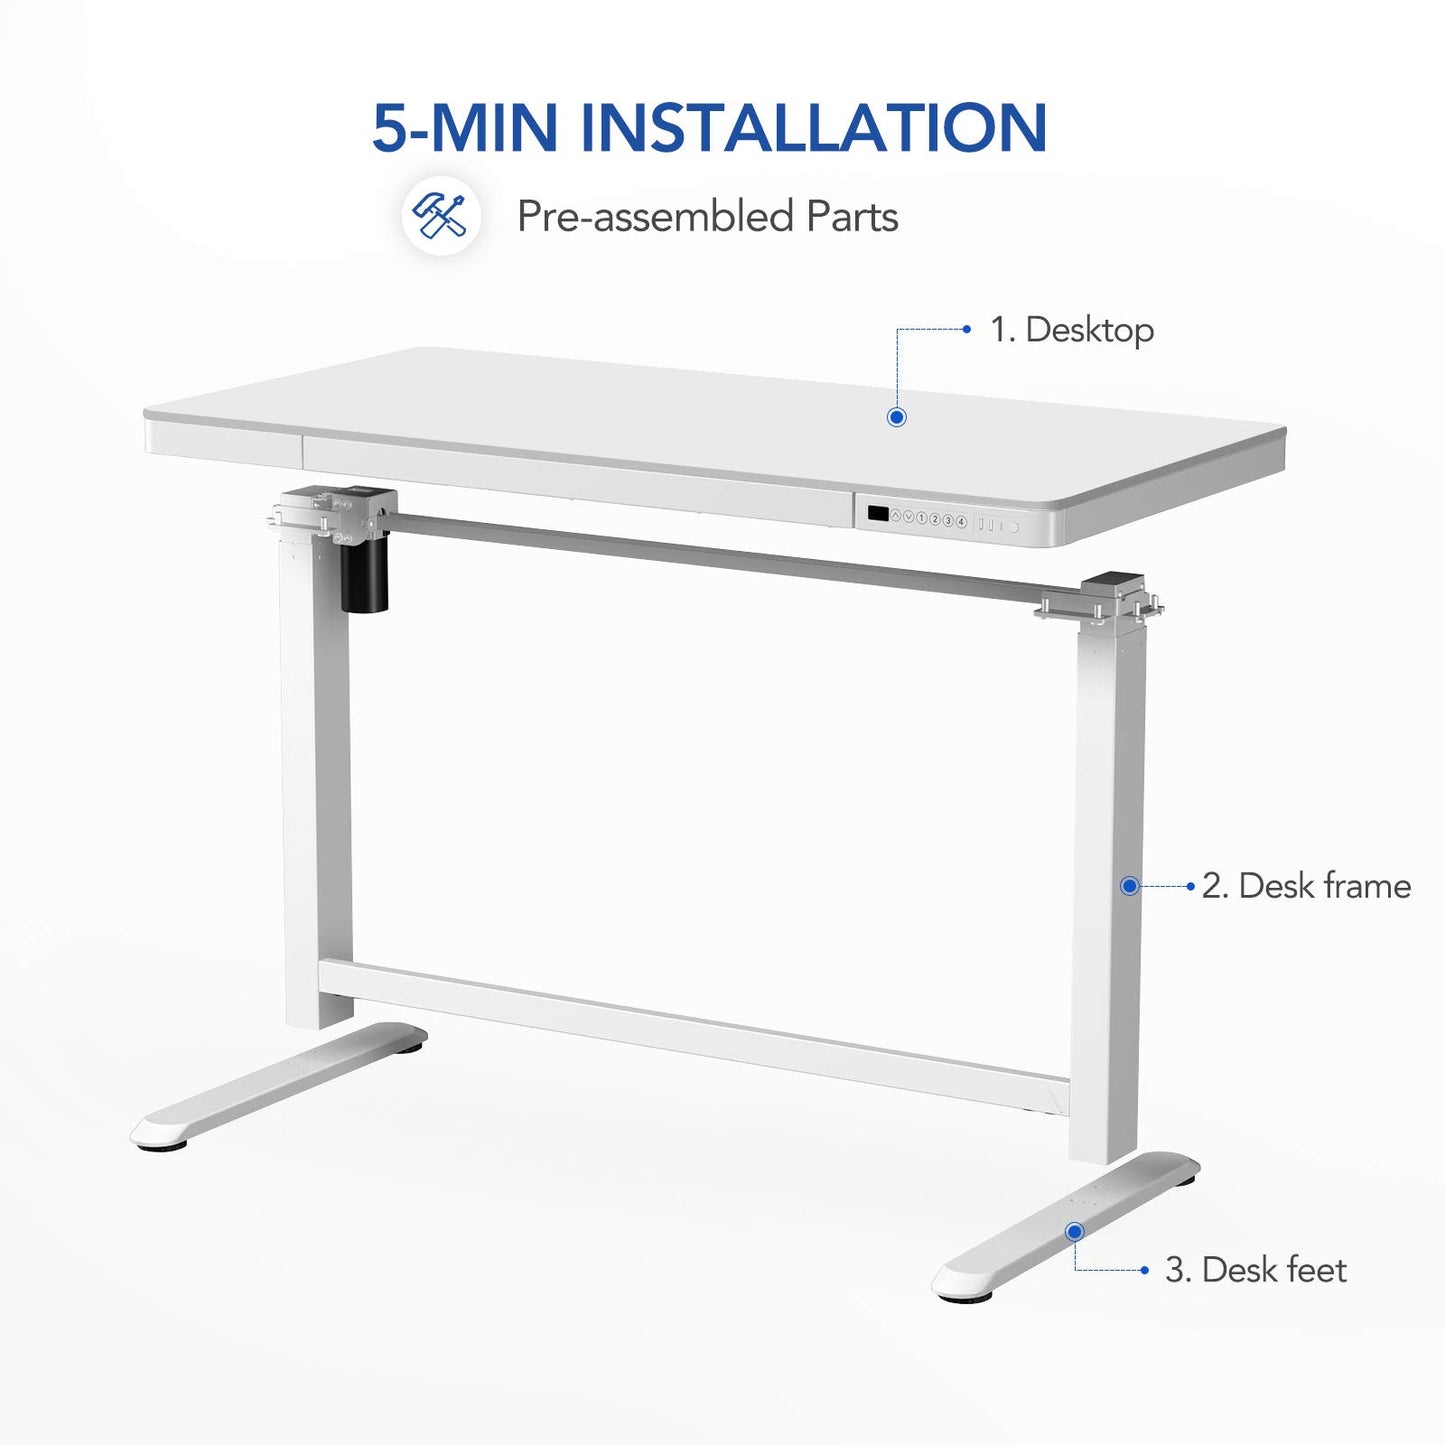 SANODESK Standing Desk with Drawer, Electric Height Adjustable Home Office Desk with Storage & USB Ports, 48 inch White Wood Tabletop/White Frame